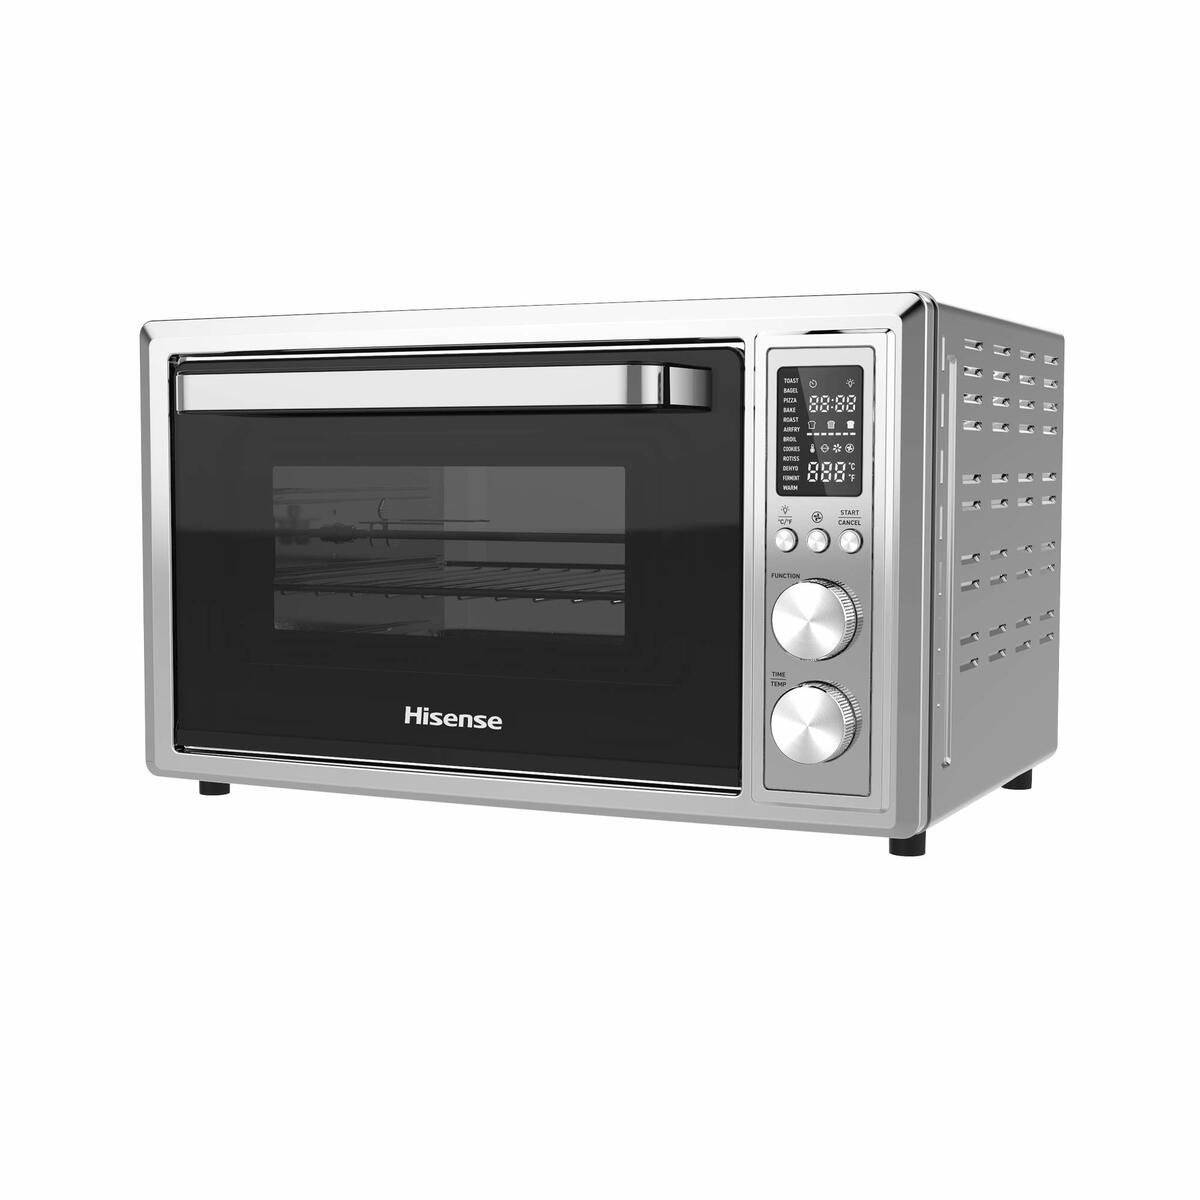 Hisense Air Fryer Toaster Oven H28EOXS7 28LTR